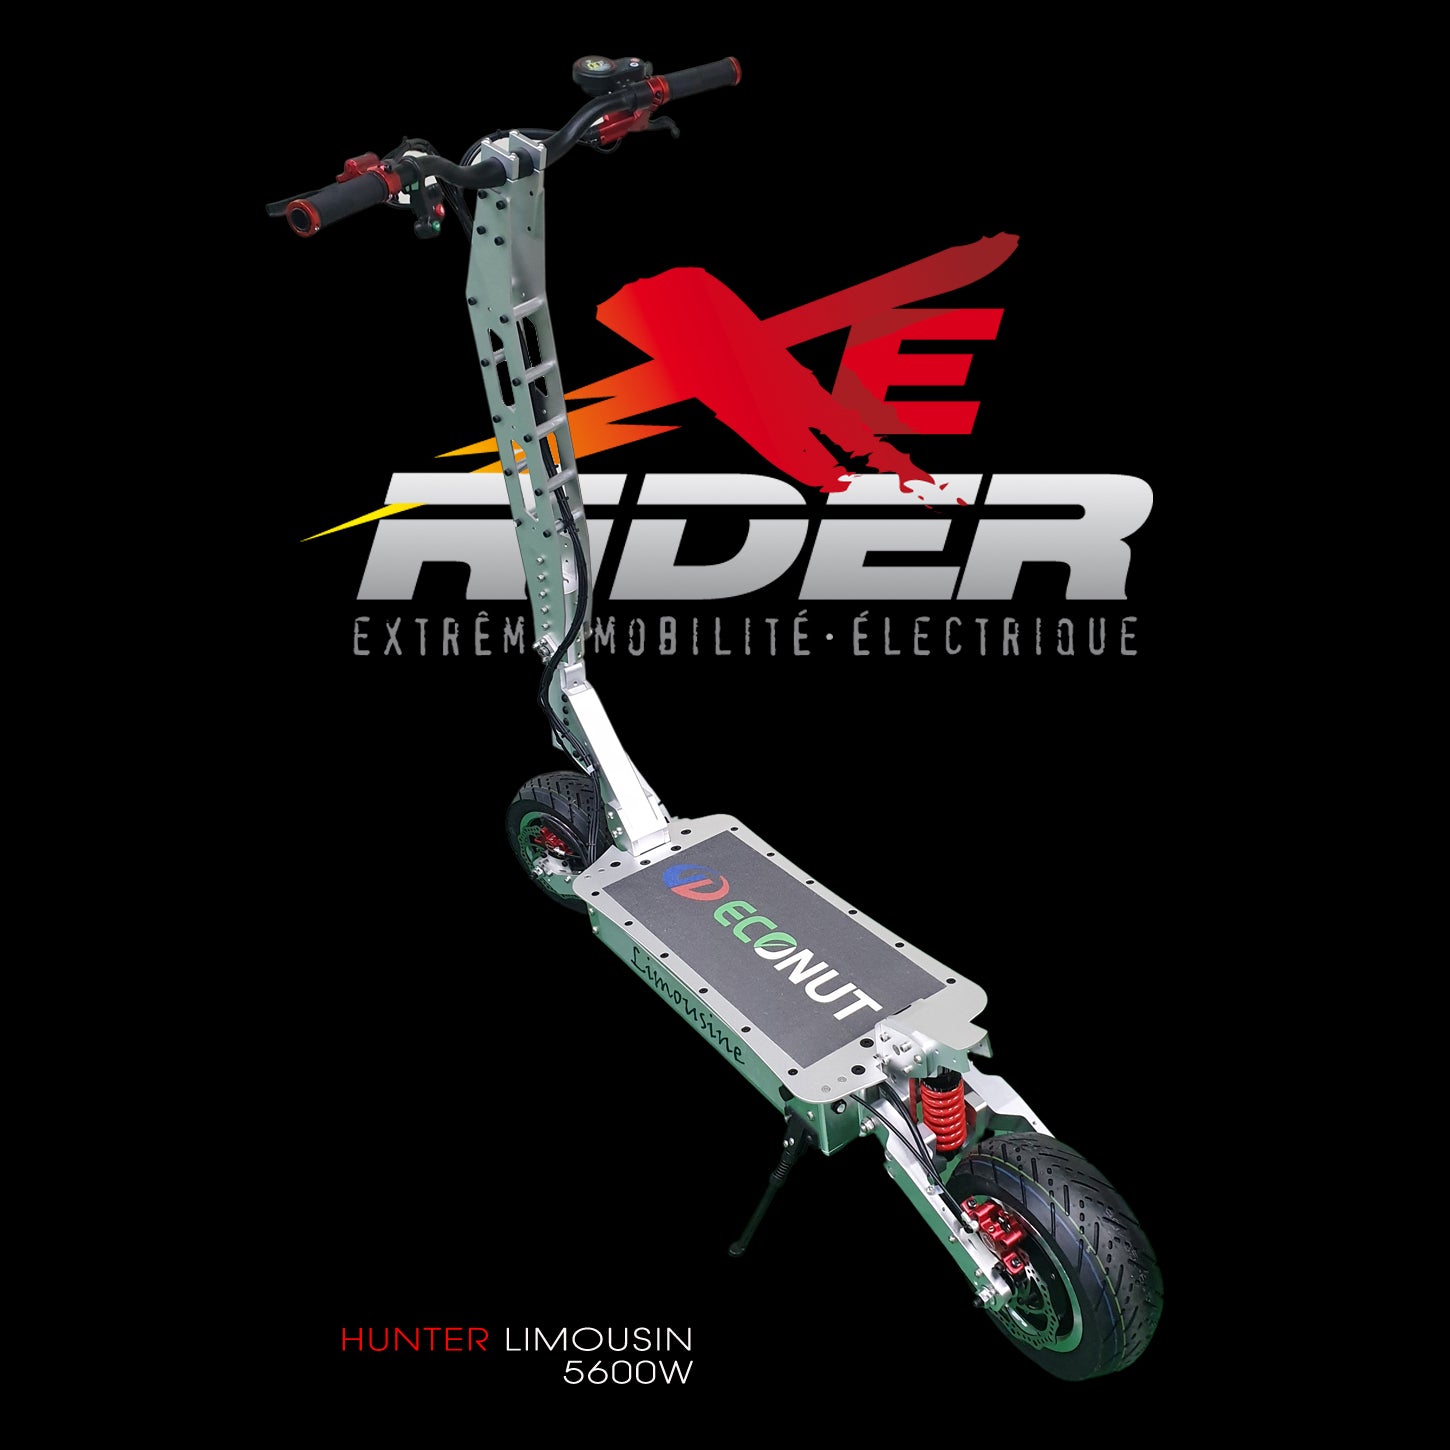 HUNTER LIMOUSINE Exclusive electric scooter 